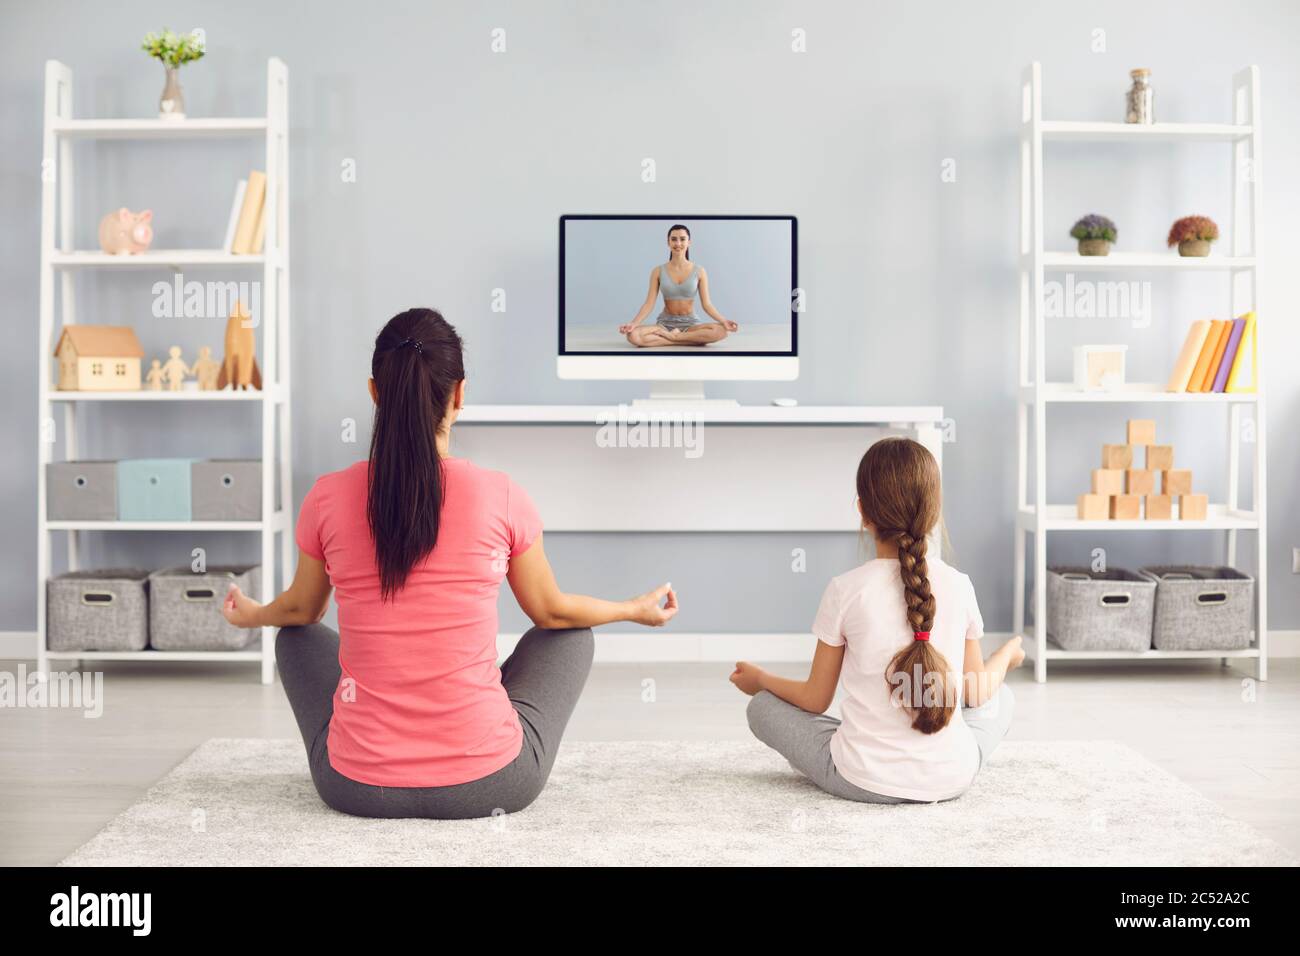 Back view of mother and daughter doing yoga to online video tutorial at home. Parent and child meditating or exercising Stock Photo